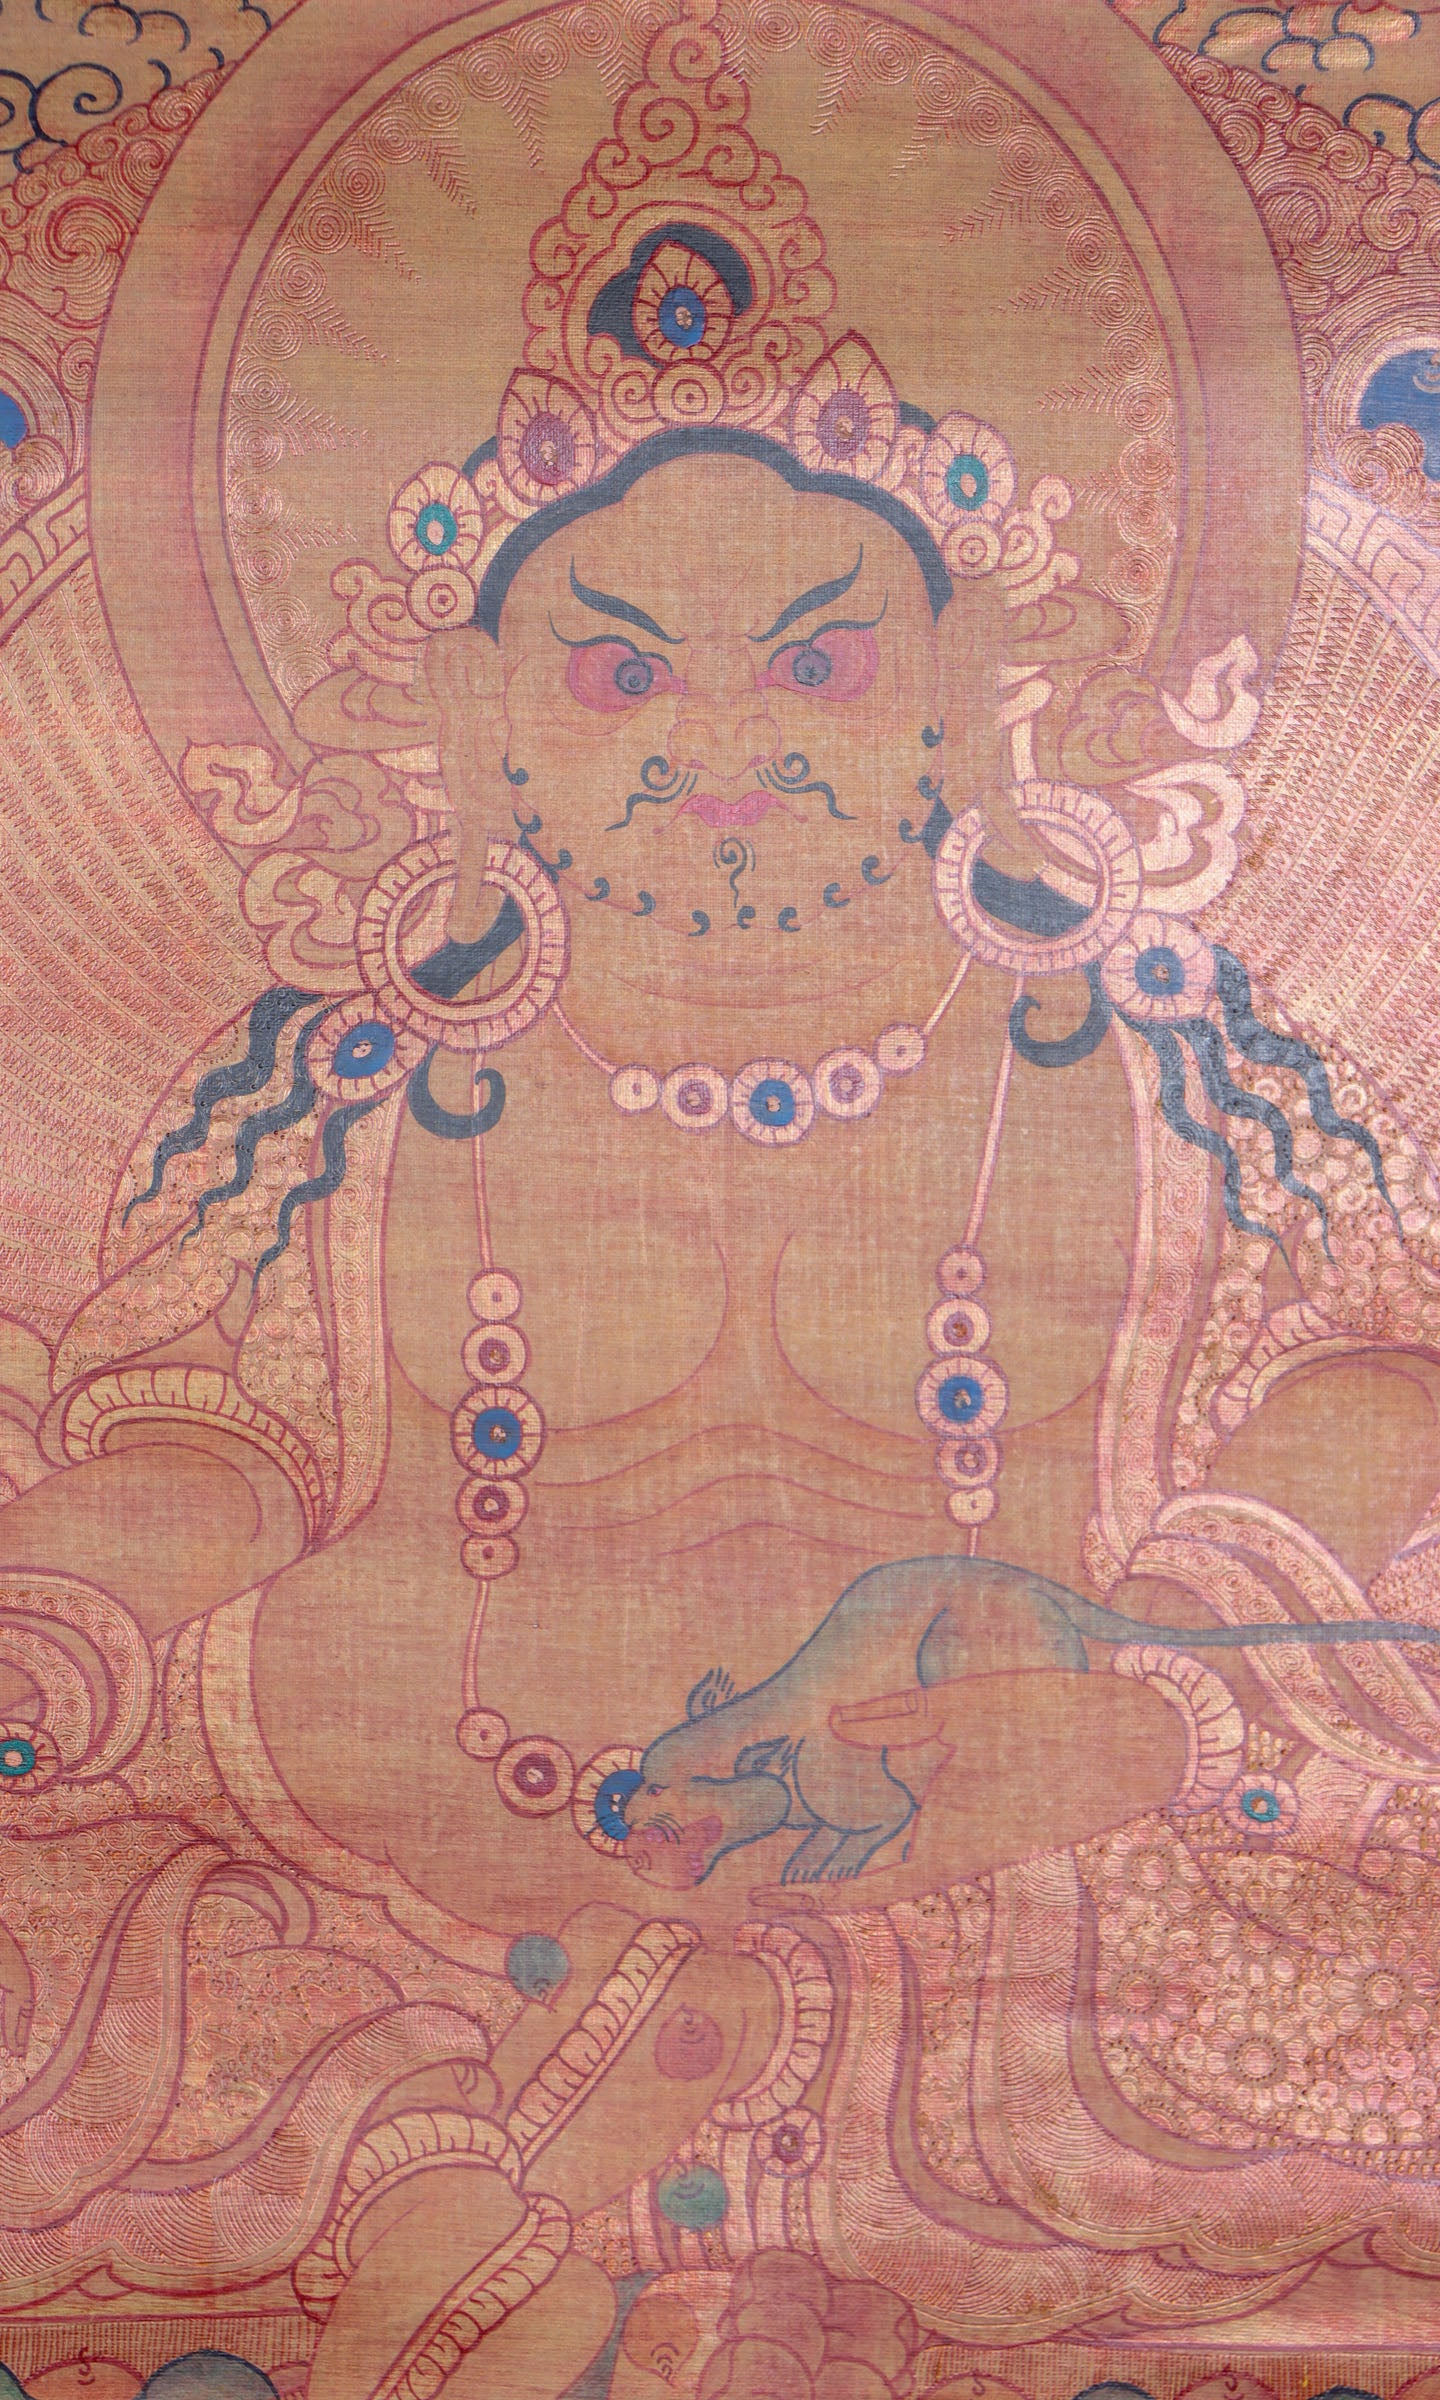 Antique Zambala Thangka Painting for wealth and prosperity.